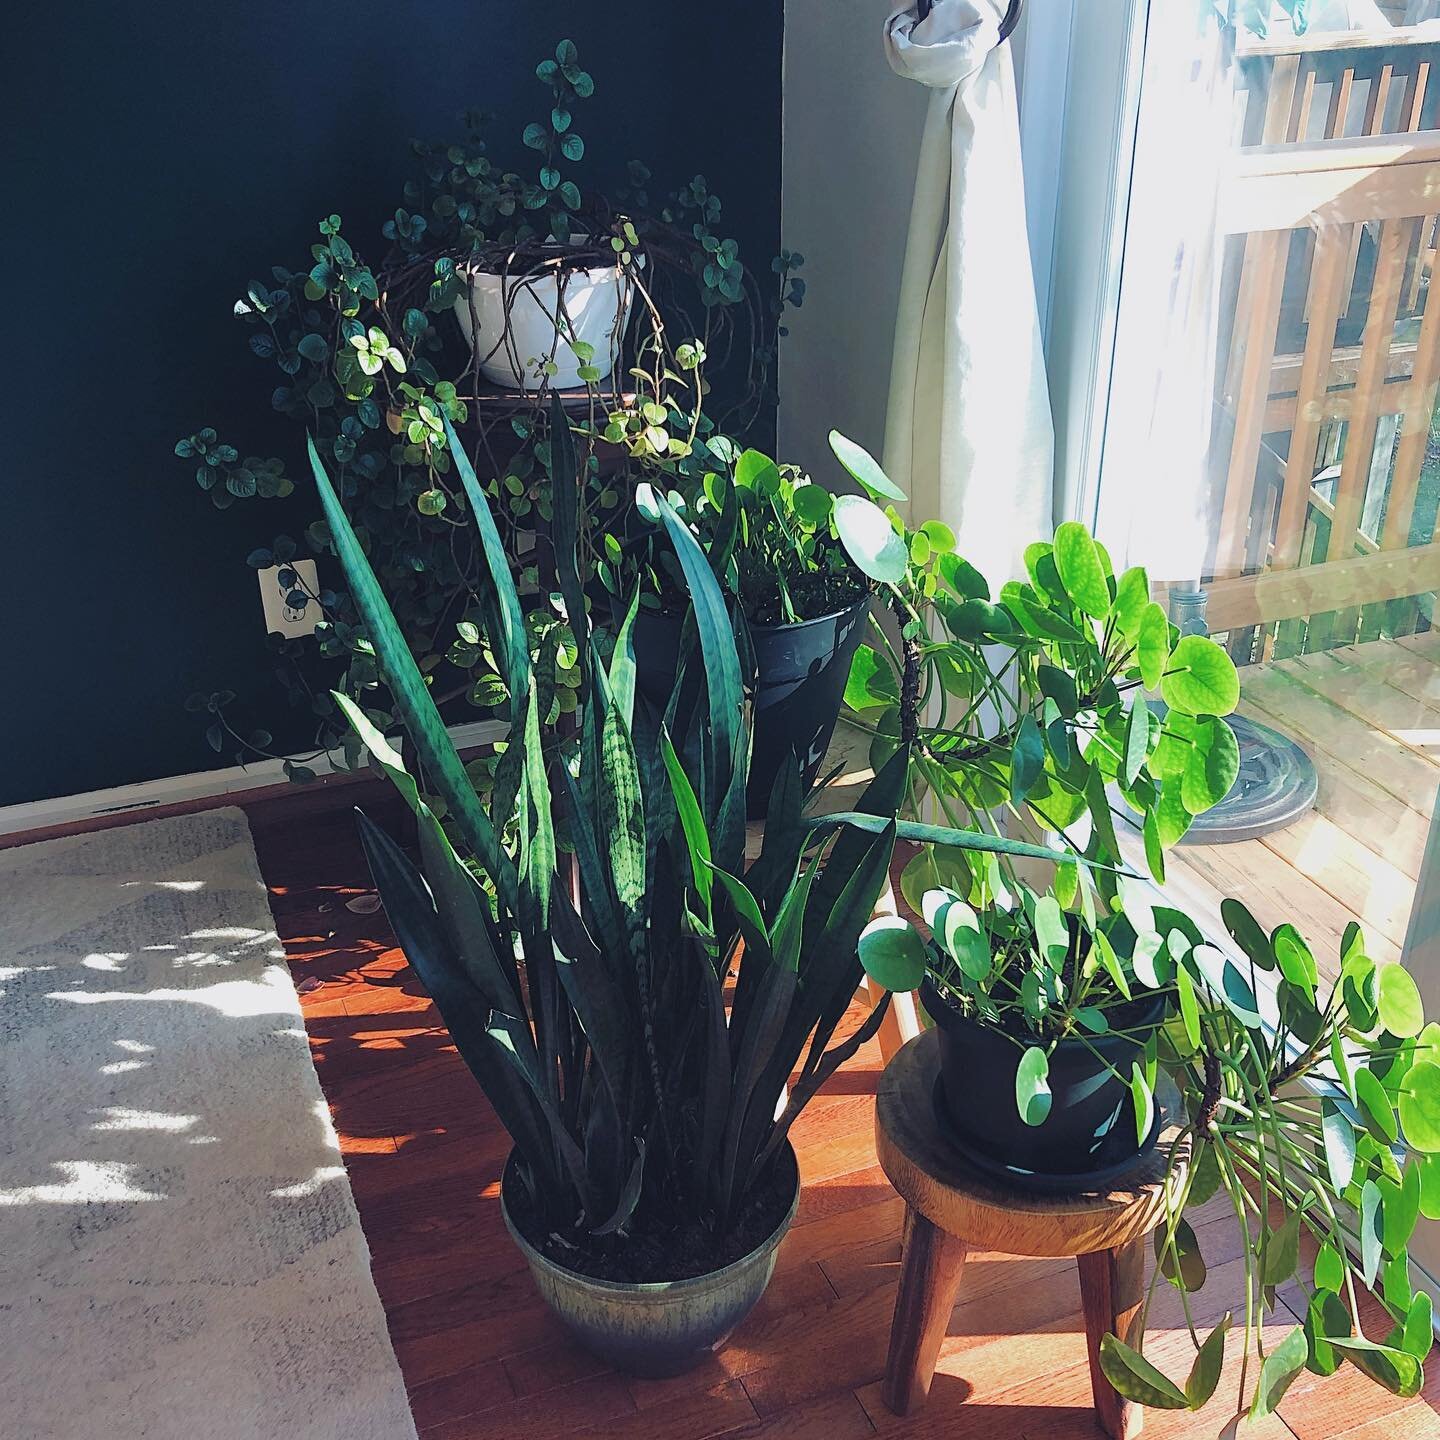 Green Babies
🌱 Sansevieria // Snake Plant
🌱 Pilea Peperomioides // Money Plant
🌱 Plectranthus verticillatus // Swedish Ivy
.
.
.
I love this green corner. We don&rsquo;t have too many spaces in our house that get a lot of natural light so this are